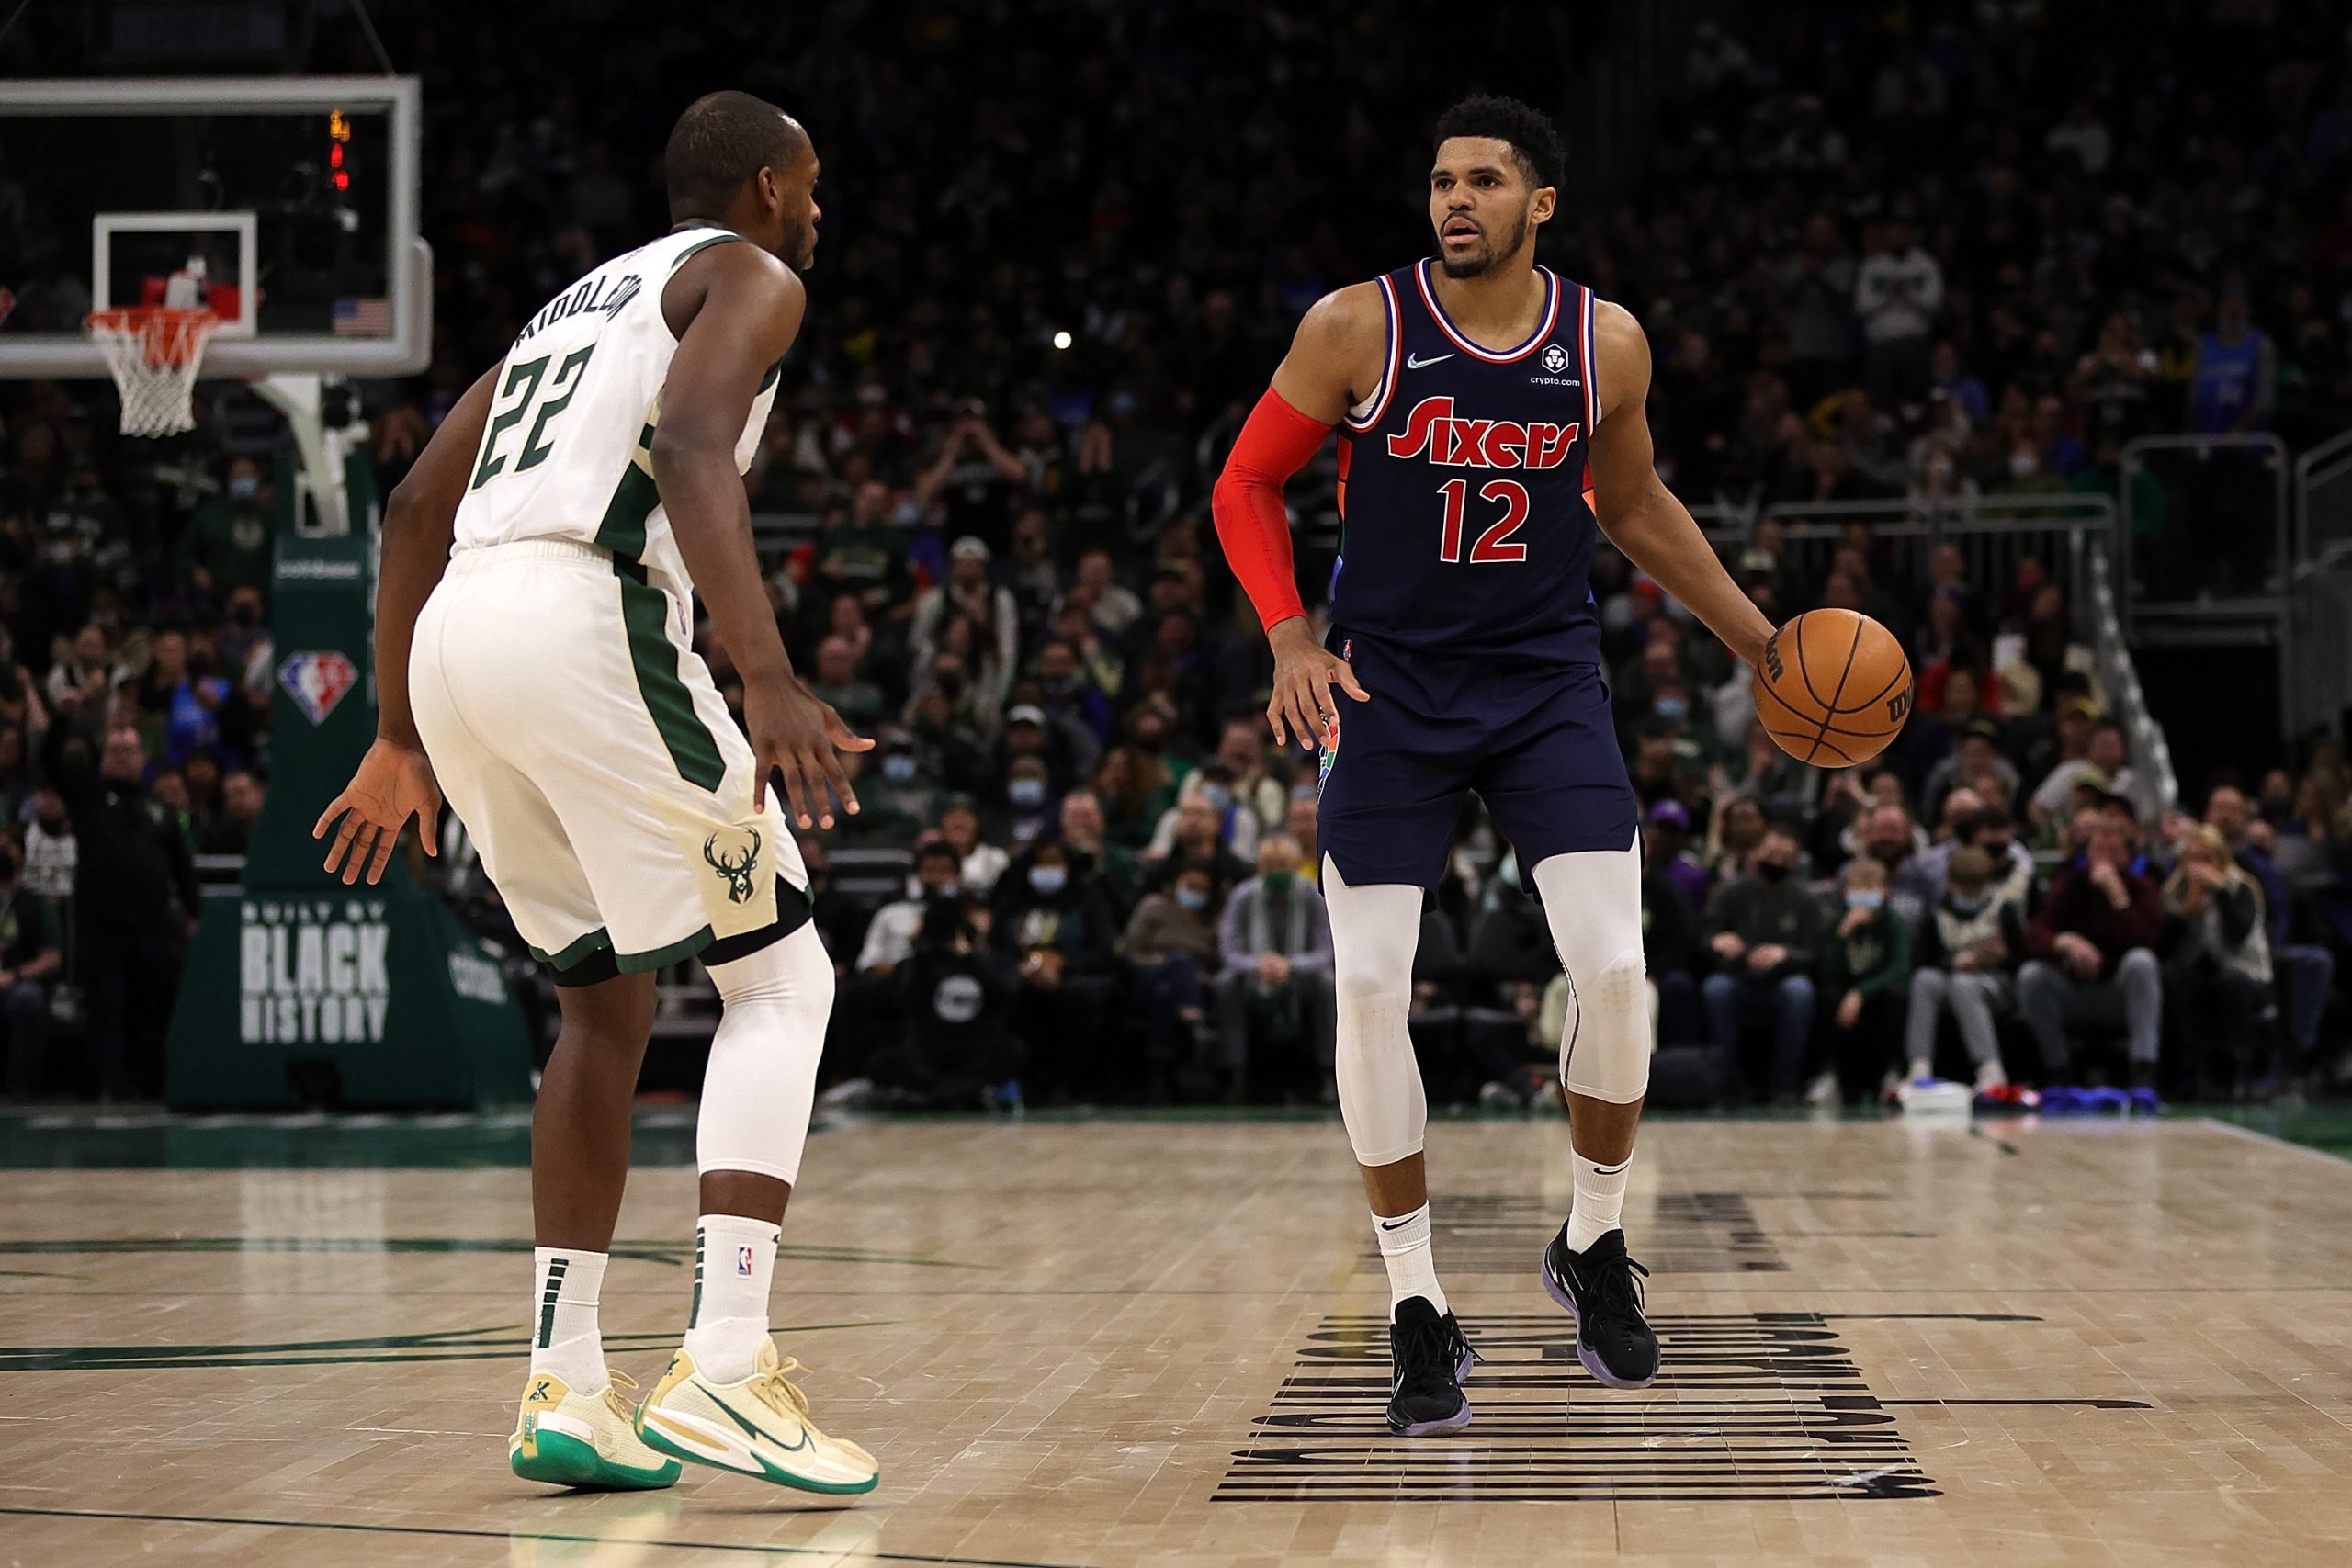 Tobias Harris of the Sixers dribbles against Khris Middleton of the Bucks